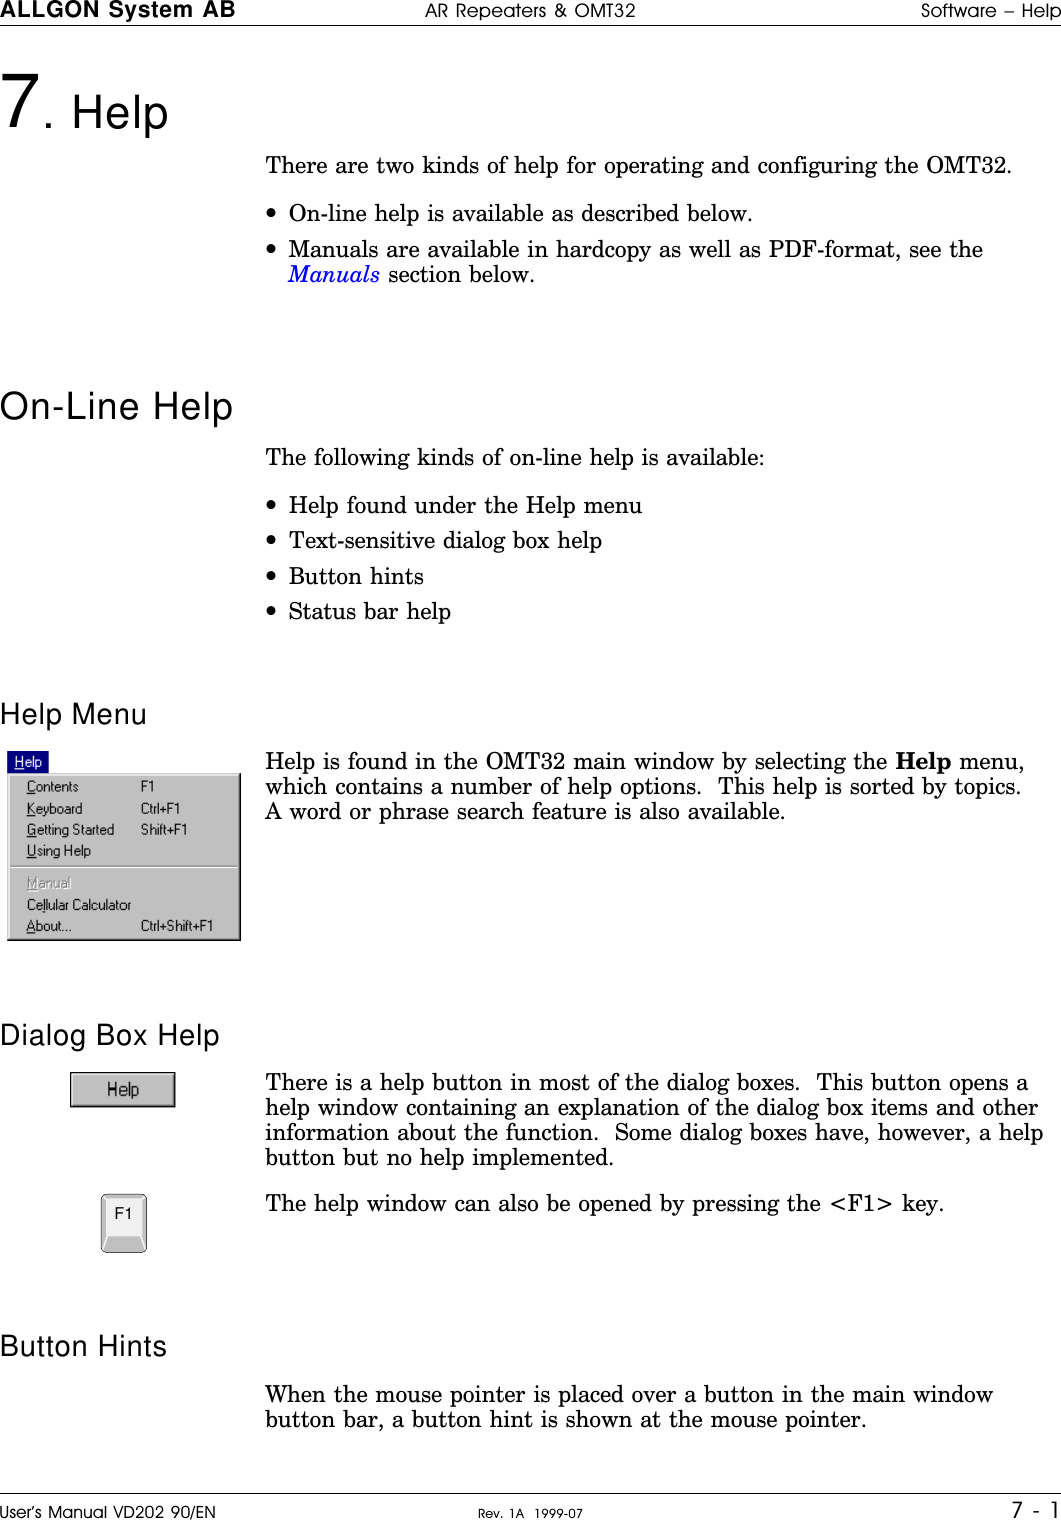 7. Help     There are two kinds of help for operating and configuring the OMT32.•On-line help is available as described below.•Manuals are available in hardcopy as well as PDF-format, see theManuals section below.On-Line HelpThe following kinds of on-line help is available:•Help found under the Help menu•Text-sensitive dialog box help•Button hints•Status bar helpHelp MenuHelp is found in the OMT32 main window by selecting the Help menu,which contains a number of help options.  This help is sorted by topics.A word or phrase search feature is also available.Dialog Box HelpThere is a help button in most of the dialog boxes.  This button opens ahelp window containing an explanation of the dialog box items and otherinformation about the function.  Some dialog boxes have, however, a helpbutton but no help implemented.The help window can also be opened by pressing the &lt;F1&gt; key.Button HintsWhen the mouse pointer is placed over a button in the main windowbutton bar, a button hint is shown at the mouse pointer.F1ALLGON System AB AR Repeaters &amp; OMT32 Software – HelpUser’s Manual VD202 90/EN Rev. 1A  1999-07 7 - 1